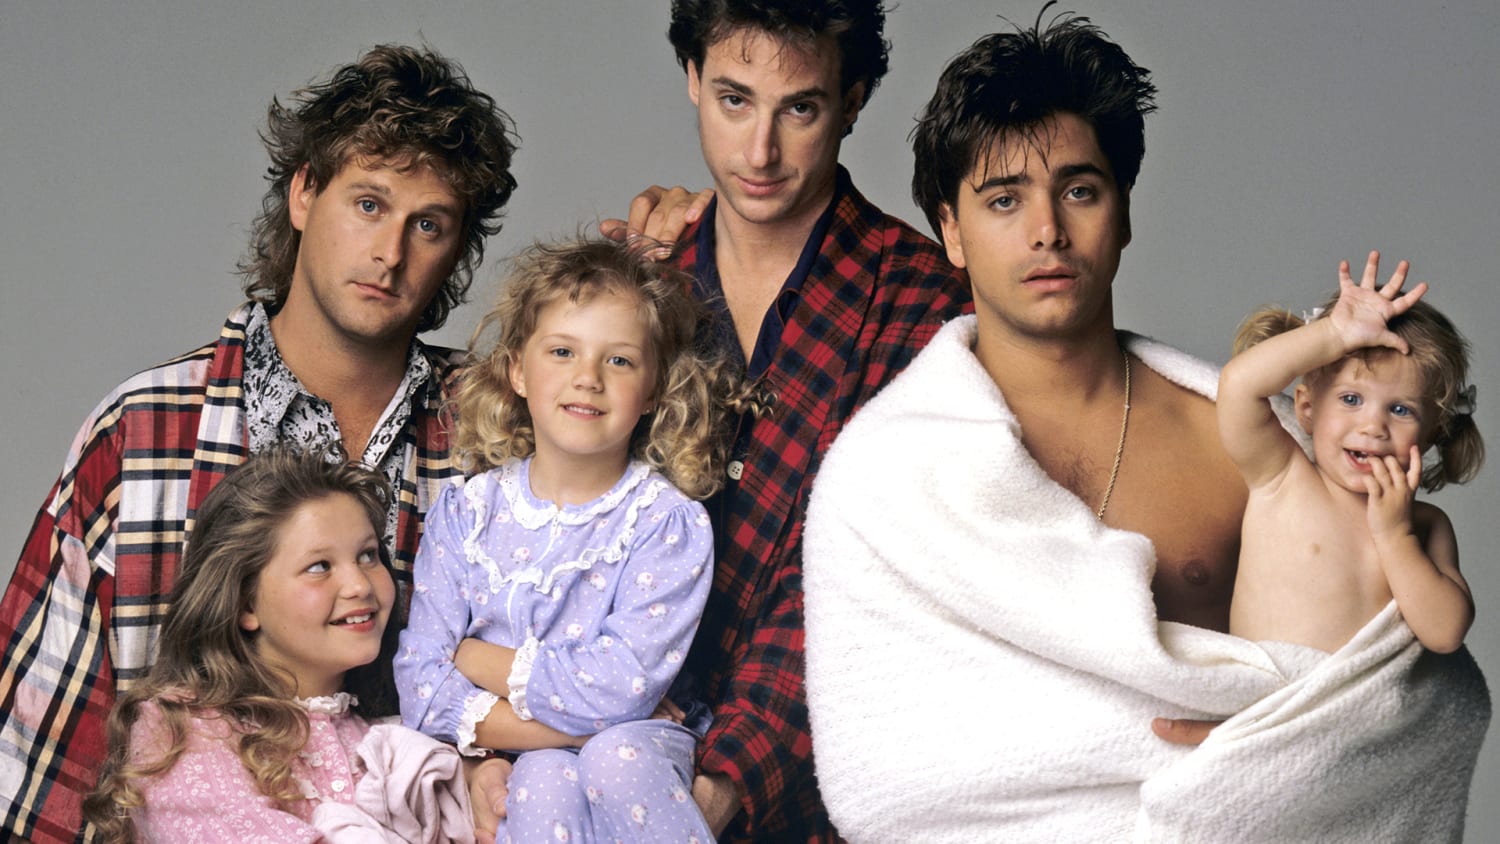 Full House Holiday Episodes Always Uncovered The True Meaning of Christmas